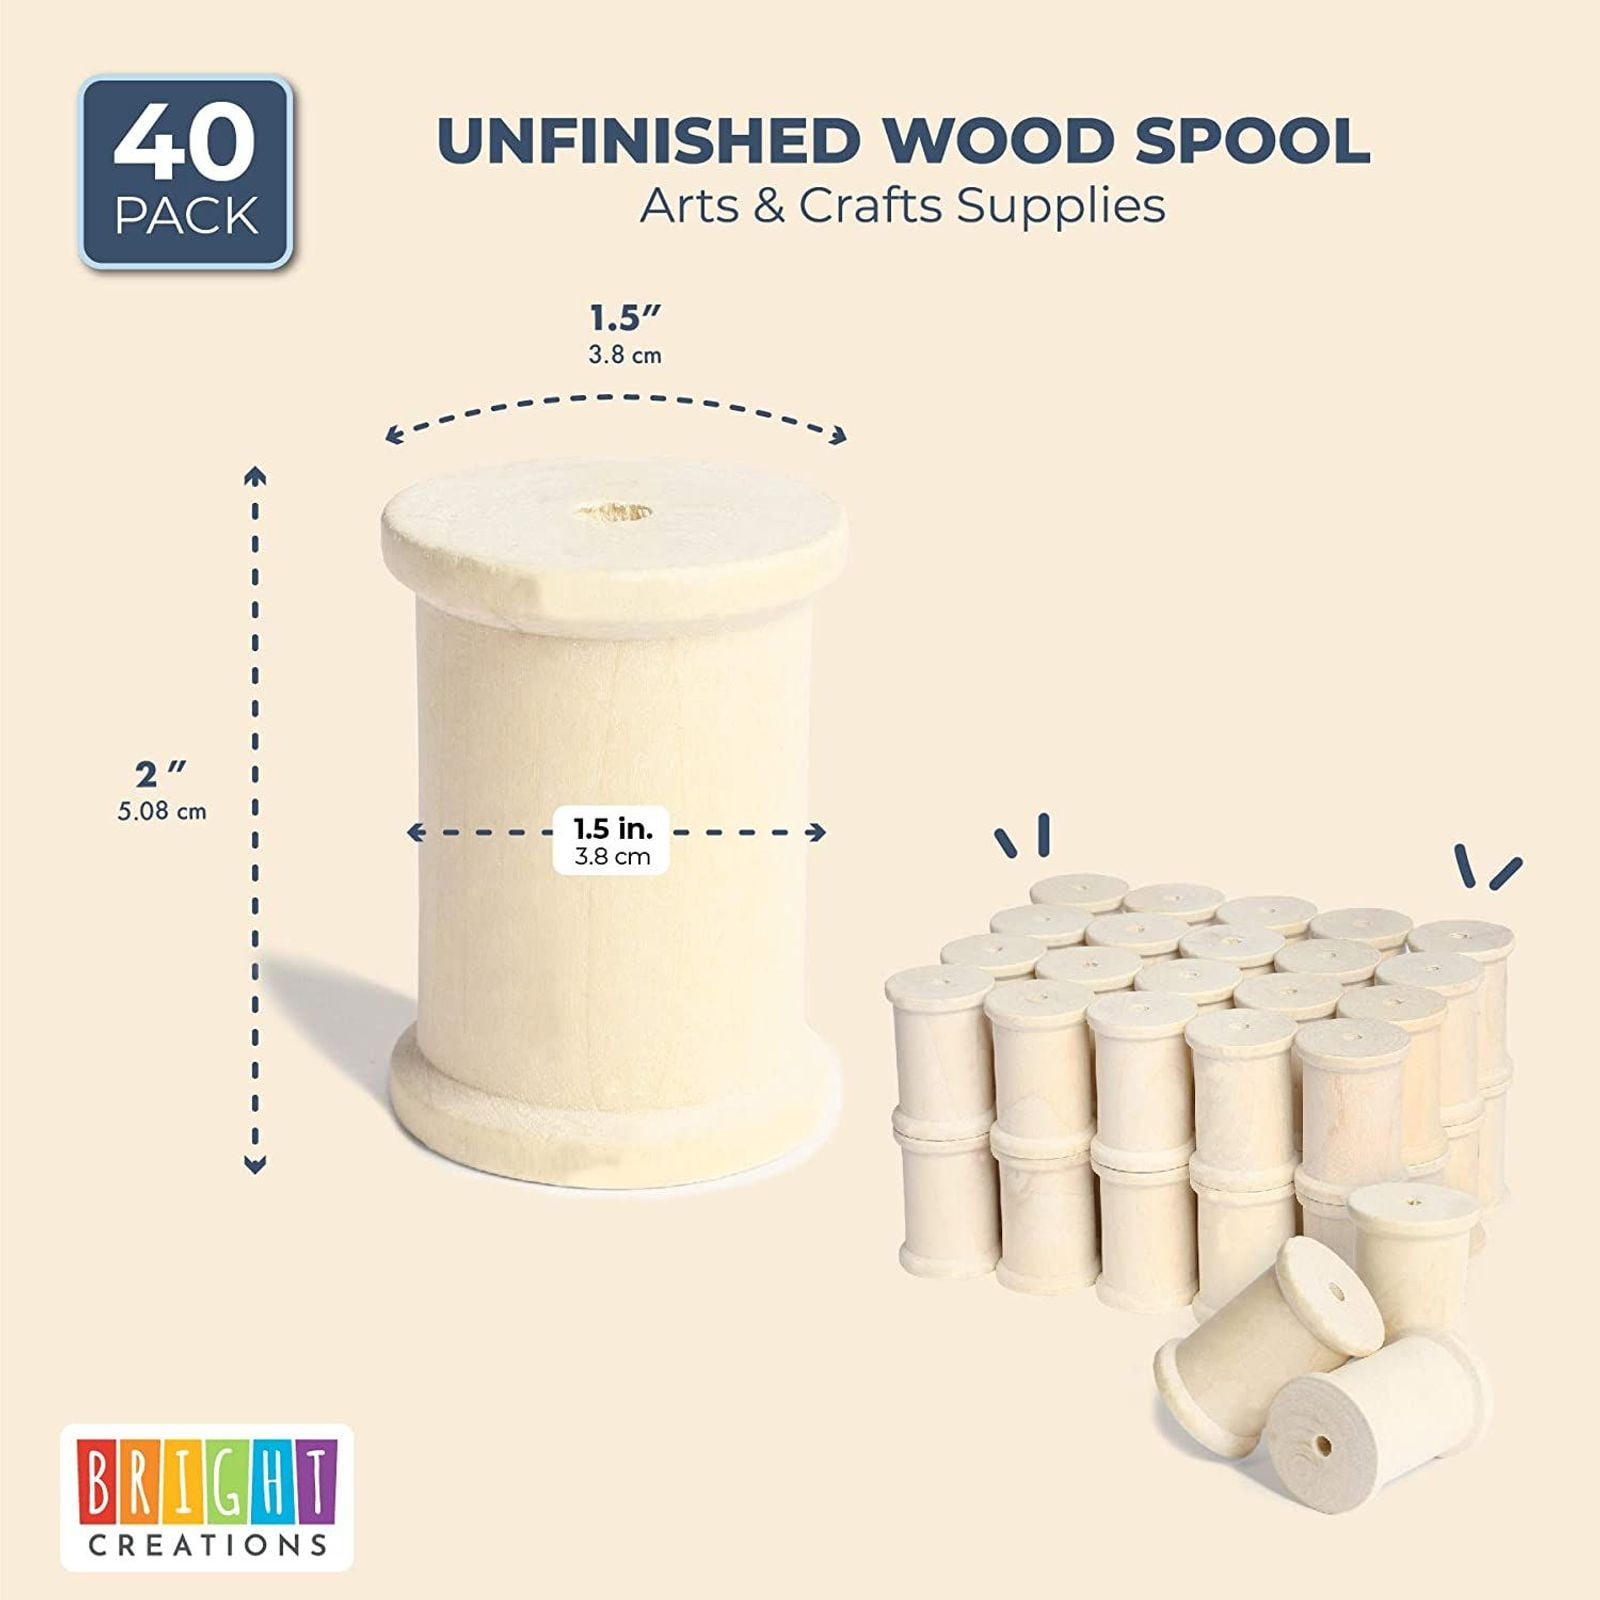 Wooden Spools 2 x 1-1/2-Inch, Pack of 12 Large Wood Spools, Unfinished Birch, Splinter-Free, for Crafts by Woodpeckers